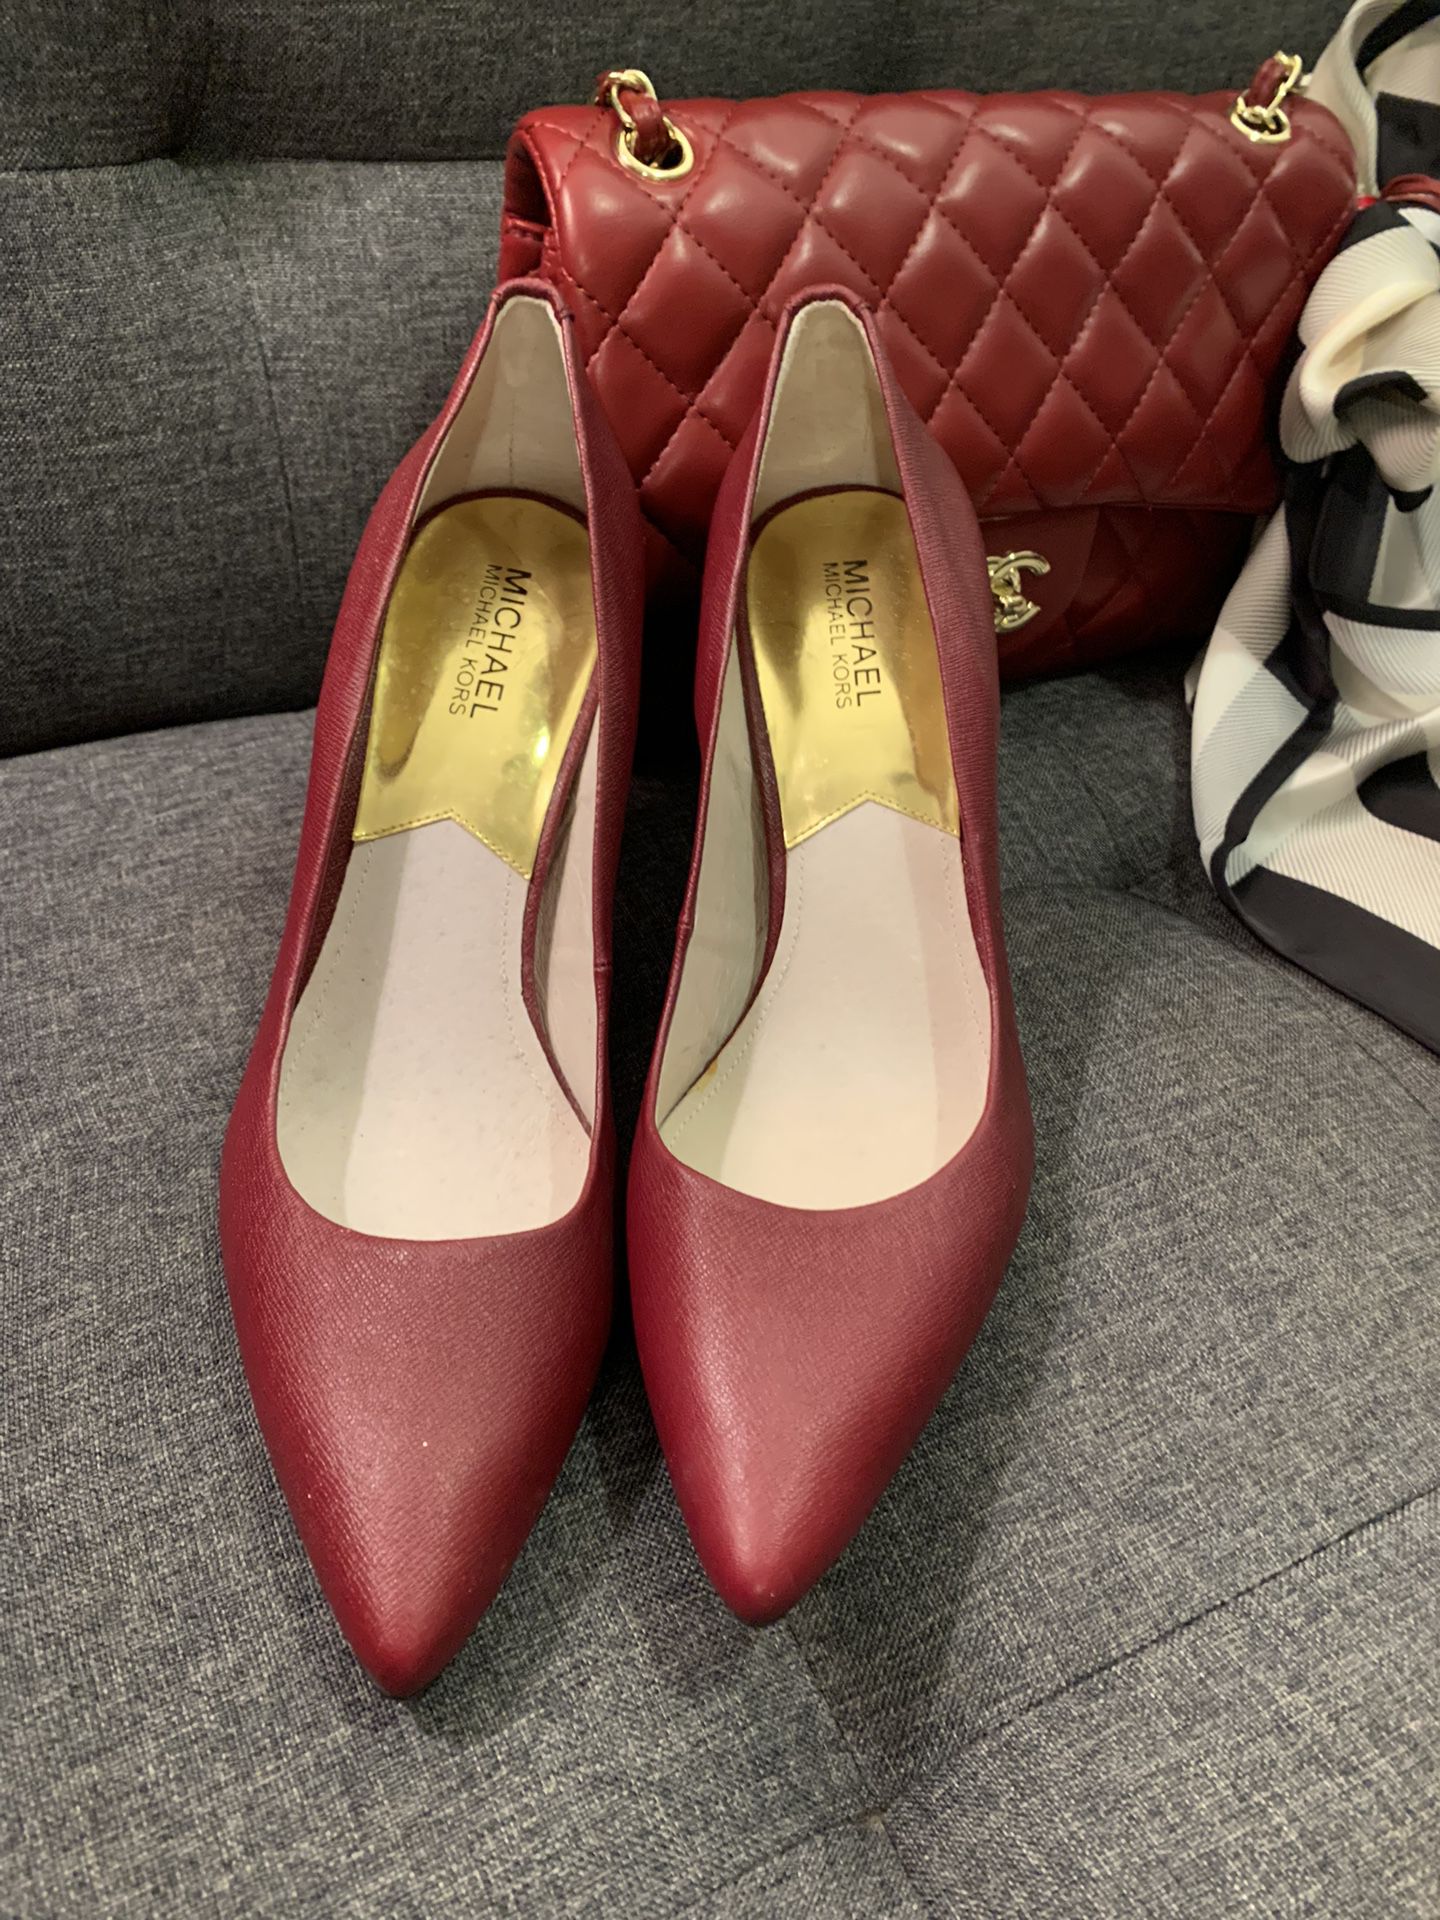 New Michael Kors Women Shoes-Purse/Scarf Not Included 